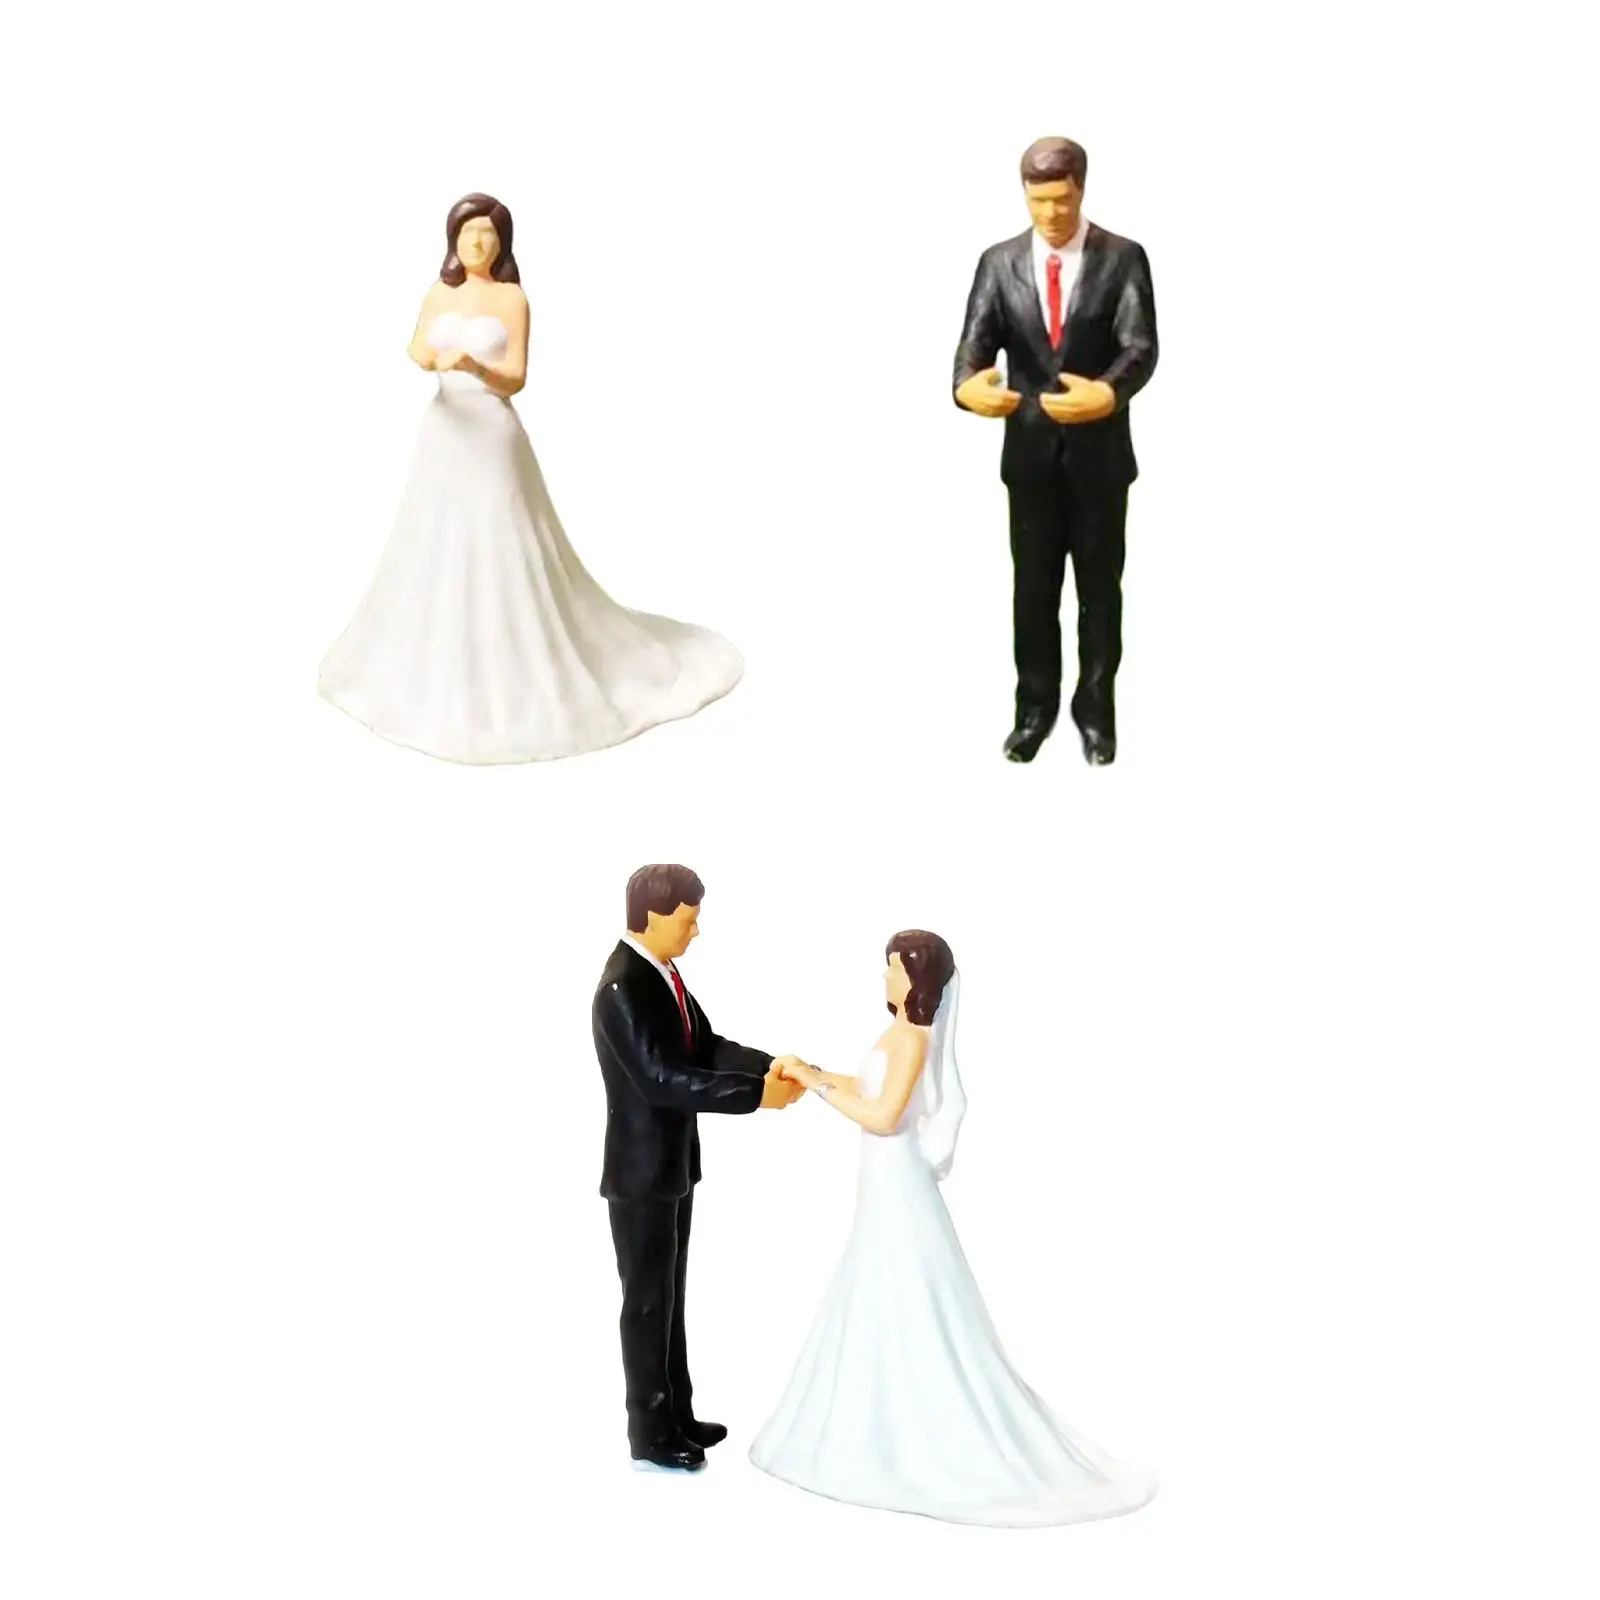 Resin 1/64 Wedding Figures Miniature Scenes Dioramas S Scale Collections Desktop Ornament DIY Projects People Model Layout Decor